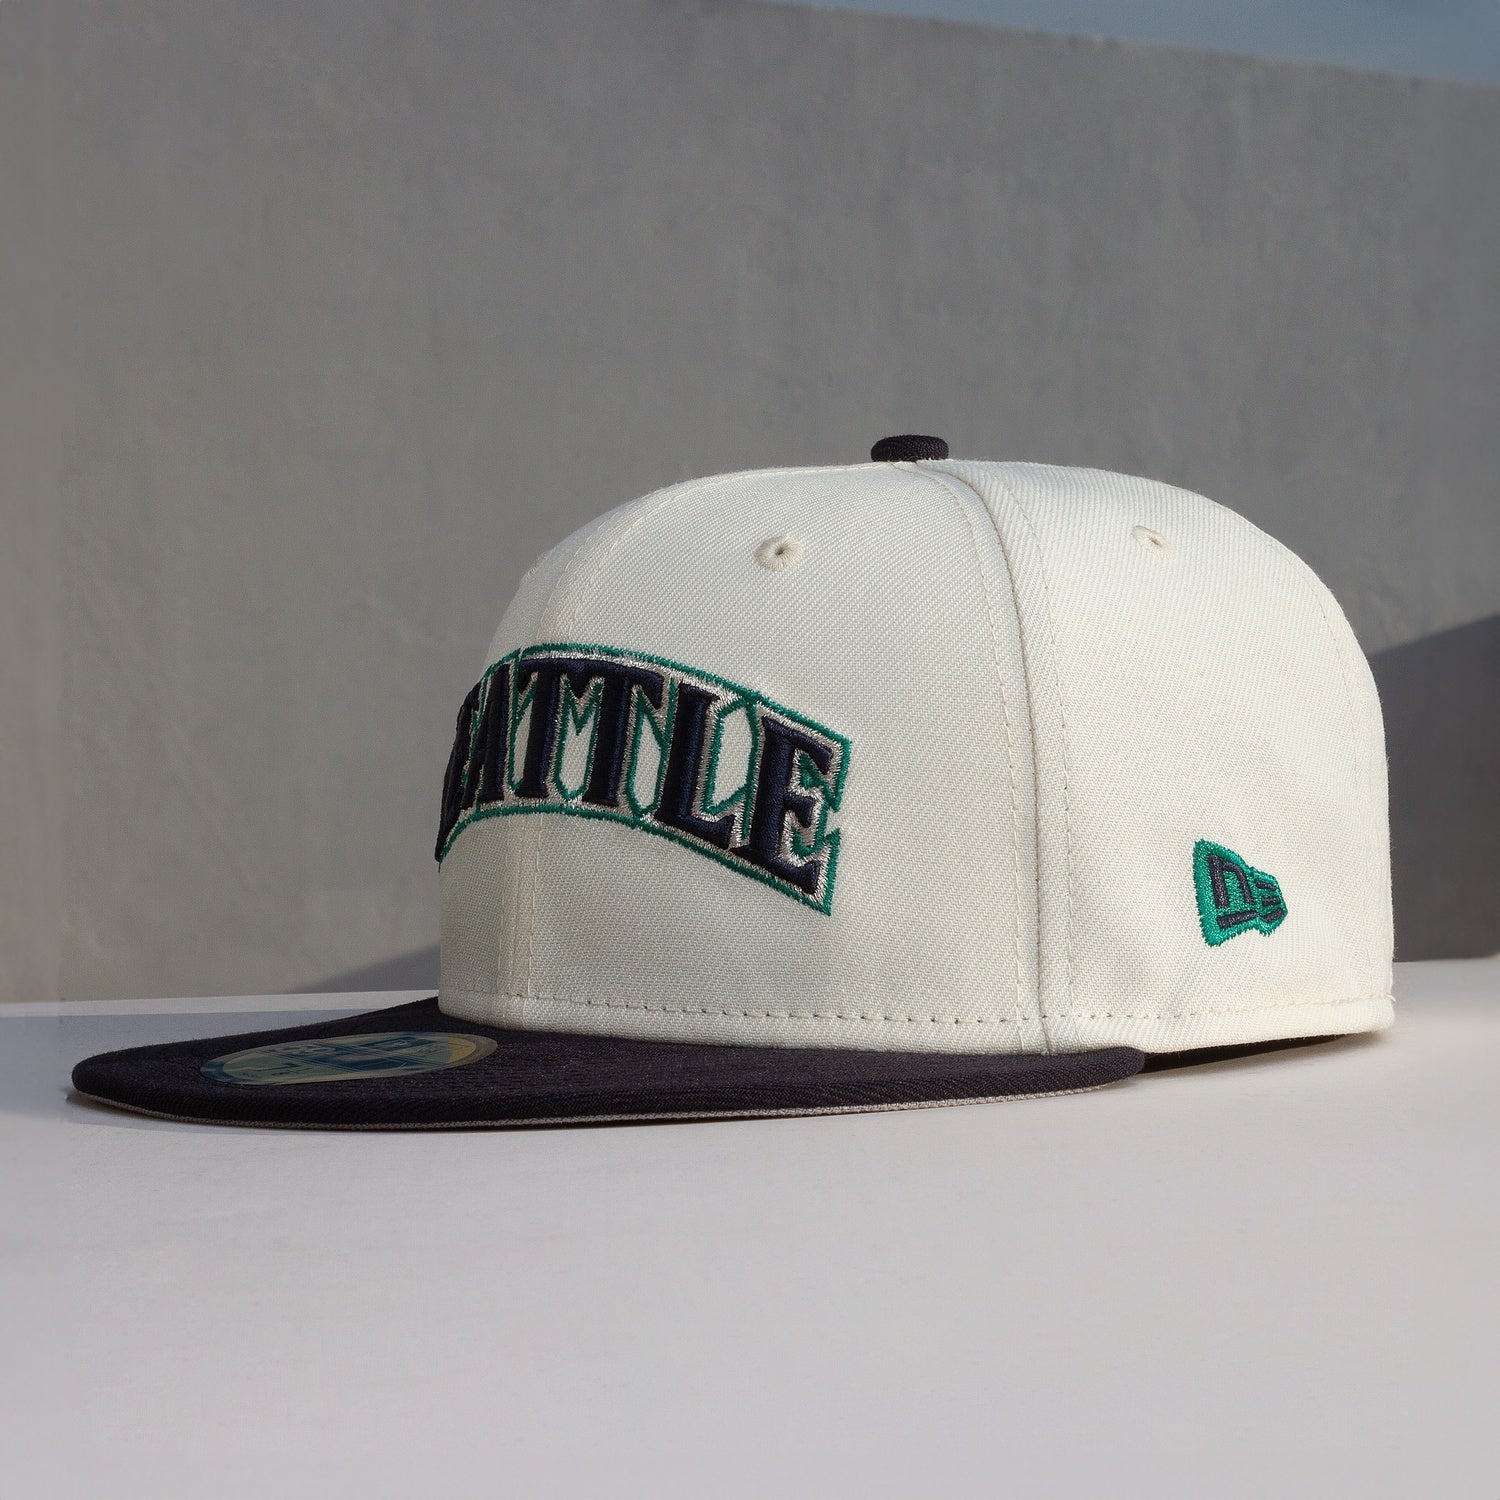 Seattle Mariners All-Star Game MLB Fan Cap, Hats for sale